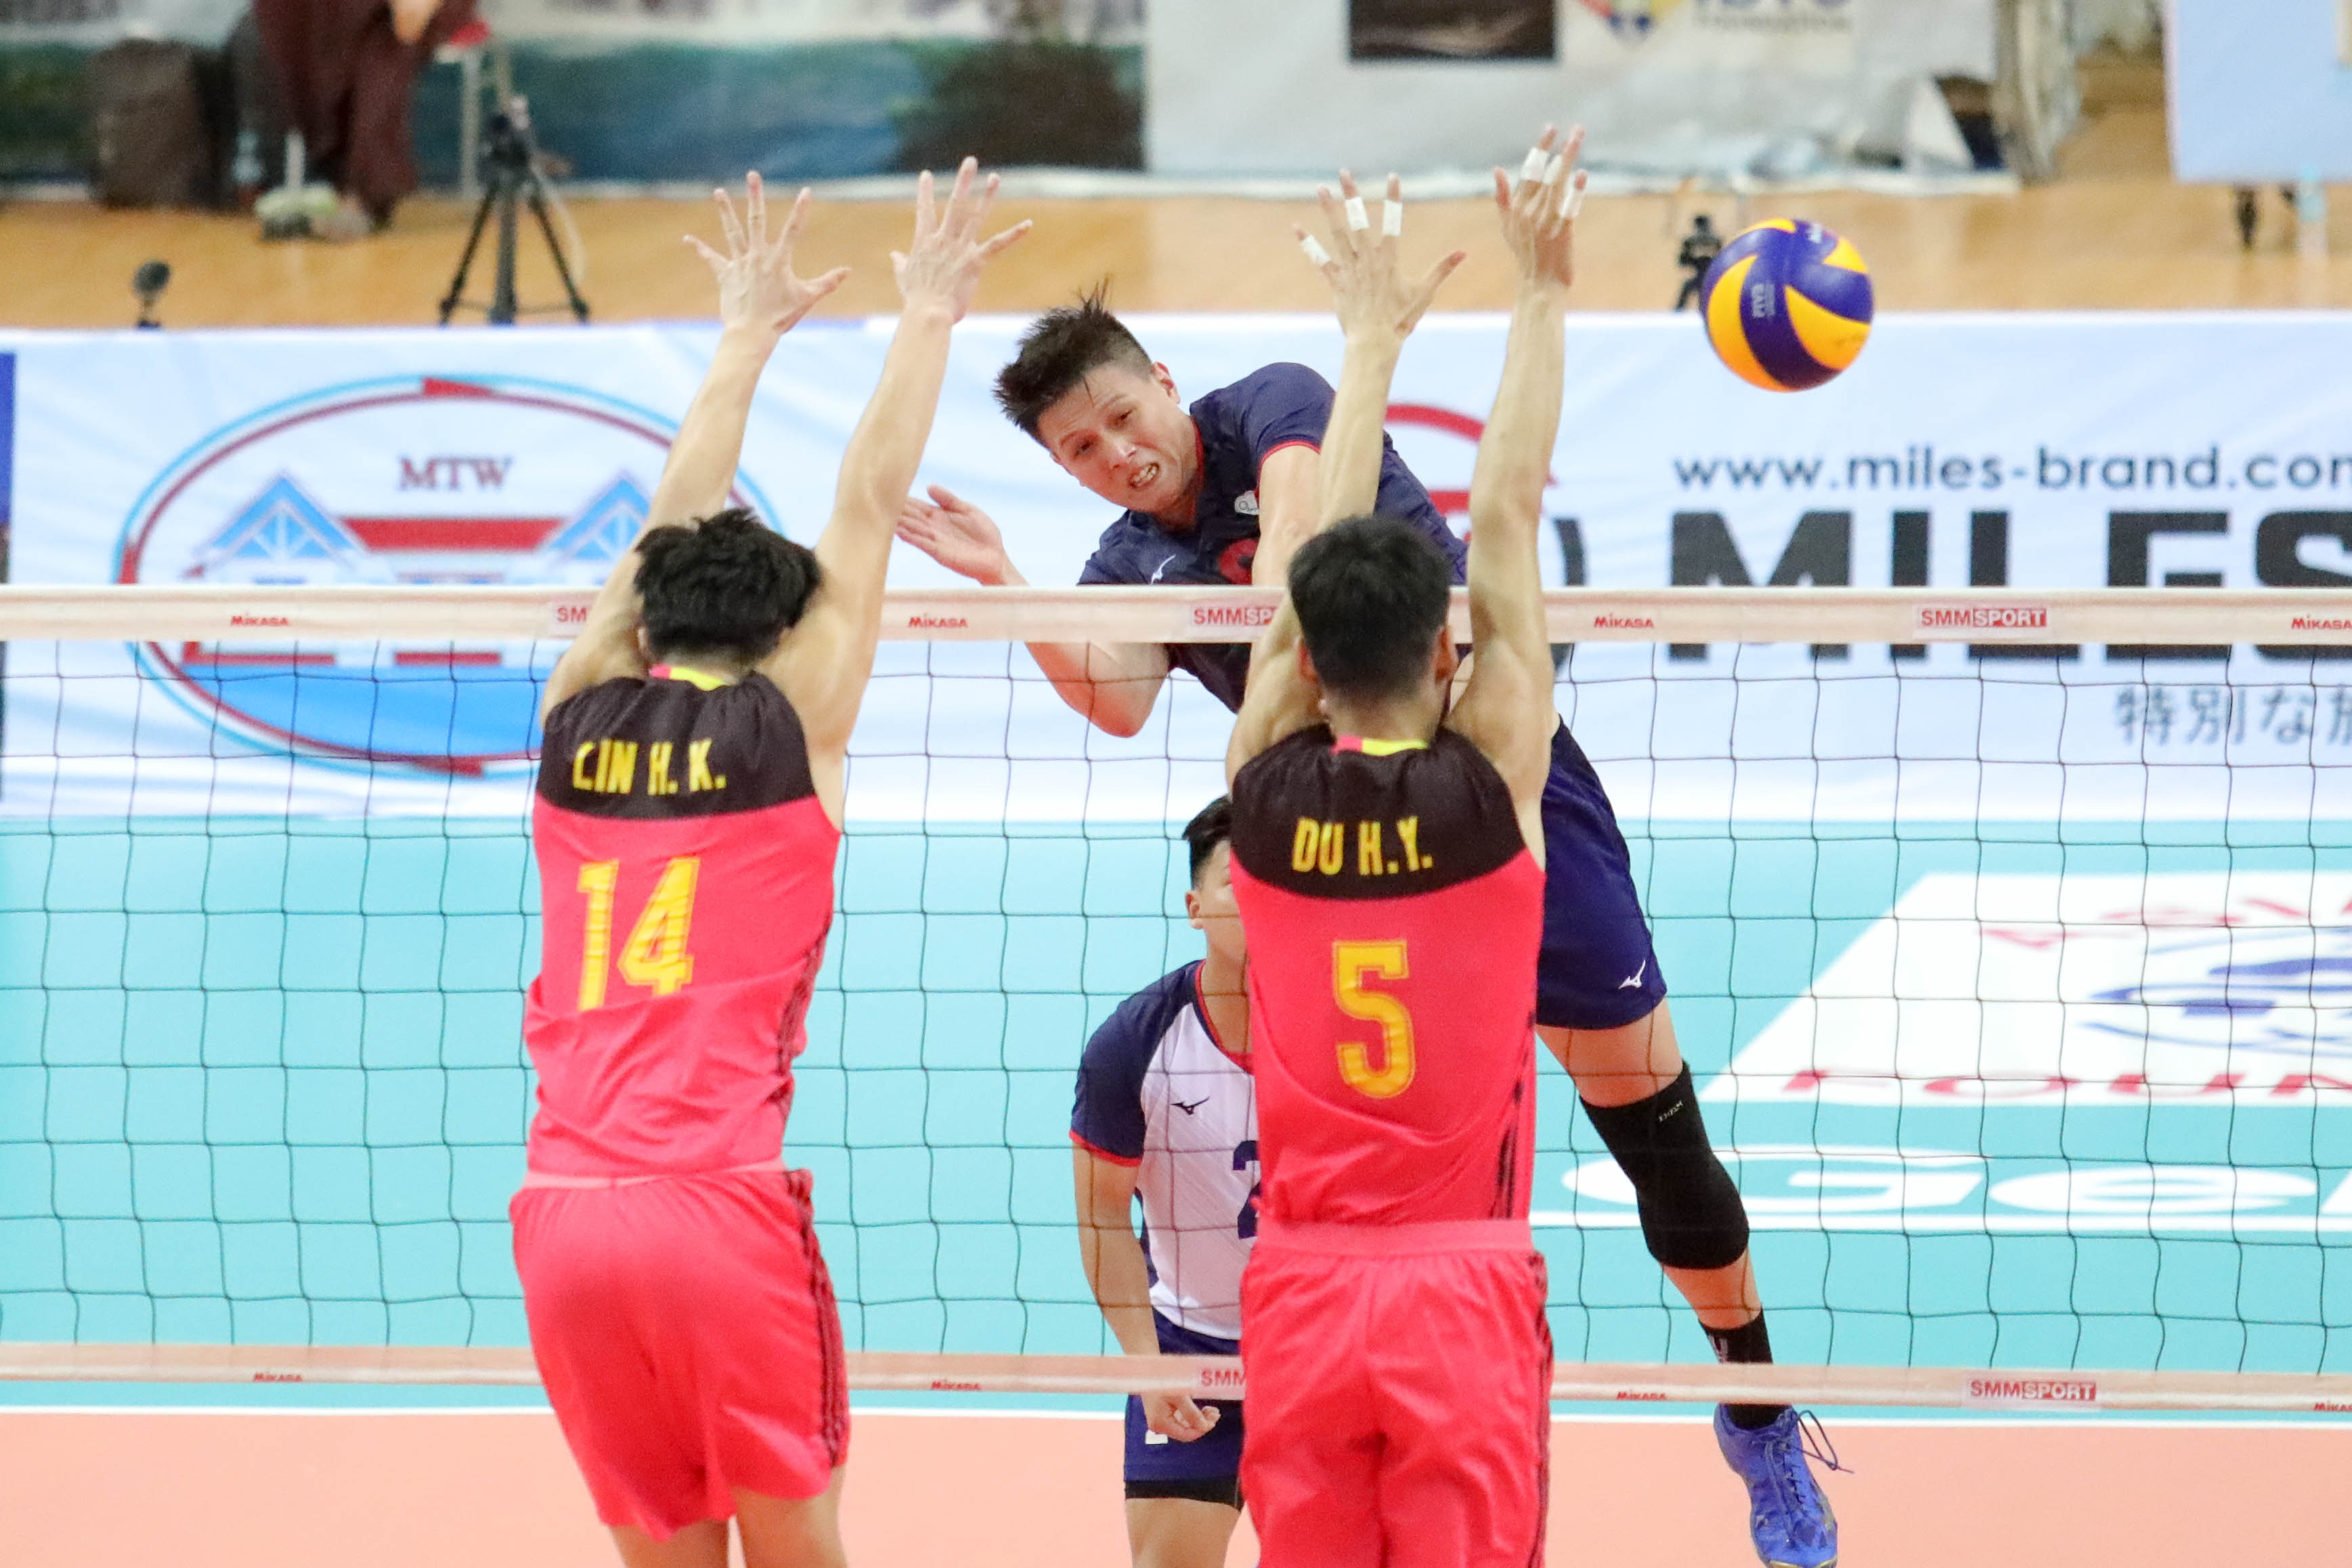 CHANG YU-SHENG INSTRUMENTAL IN LIFTING CHINESE TAIPEI’S 3-0 VICTORY OVER CHINA